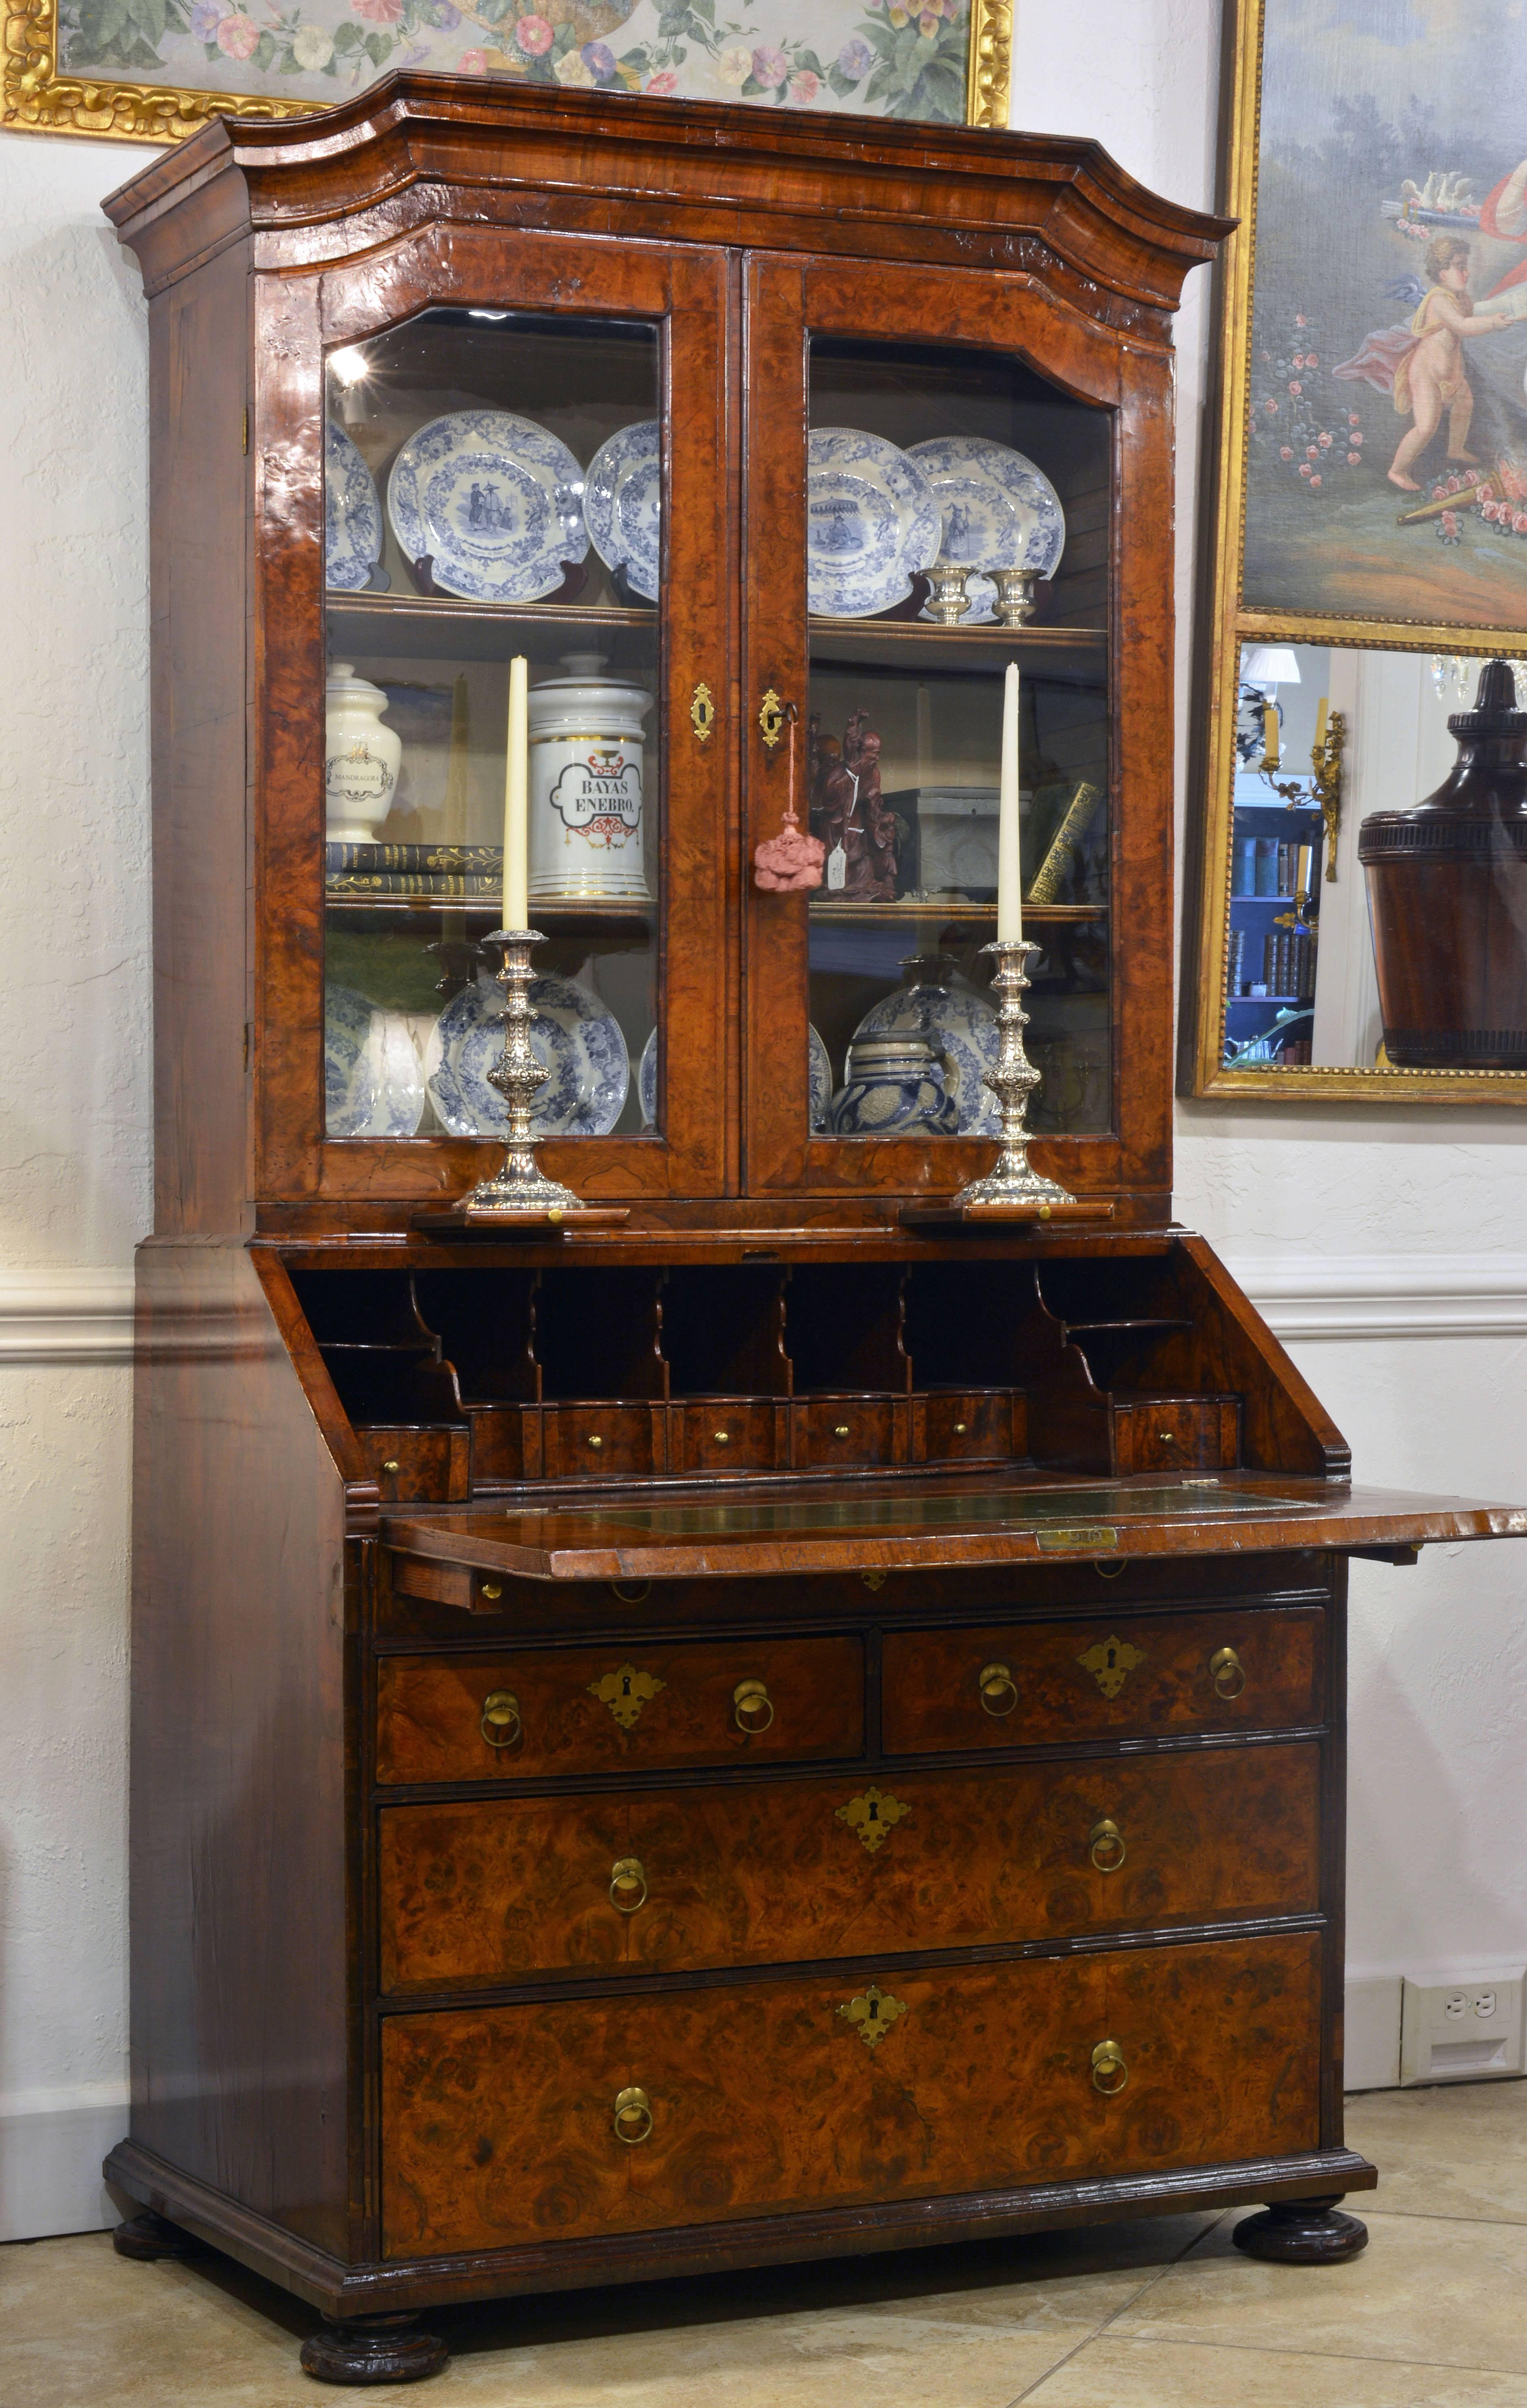 This charming two part secretary bookcase features a Dutch inspired corniche above glazed doors enclosing a silk lined interior with adjustable shelving. Right under the doors two pull-out shelves offer the possibility of placing candlesticks. The